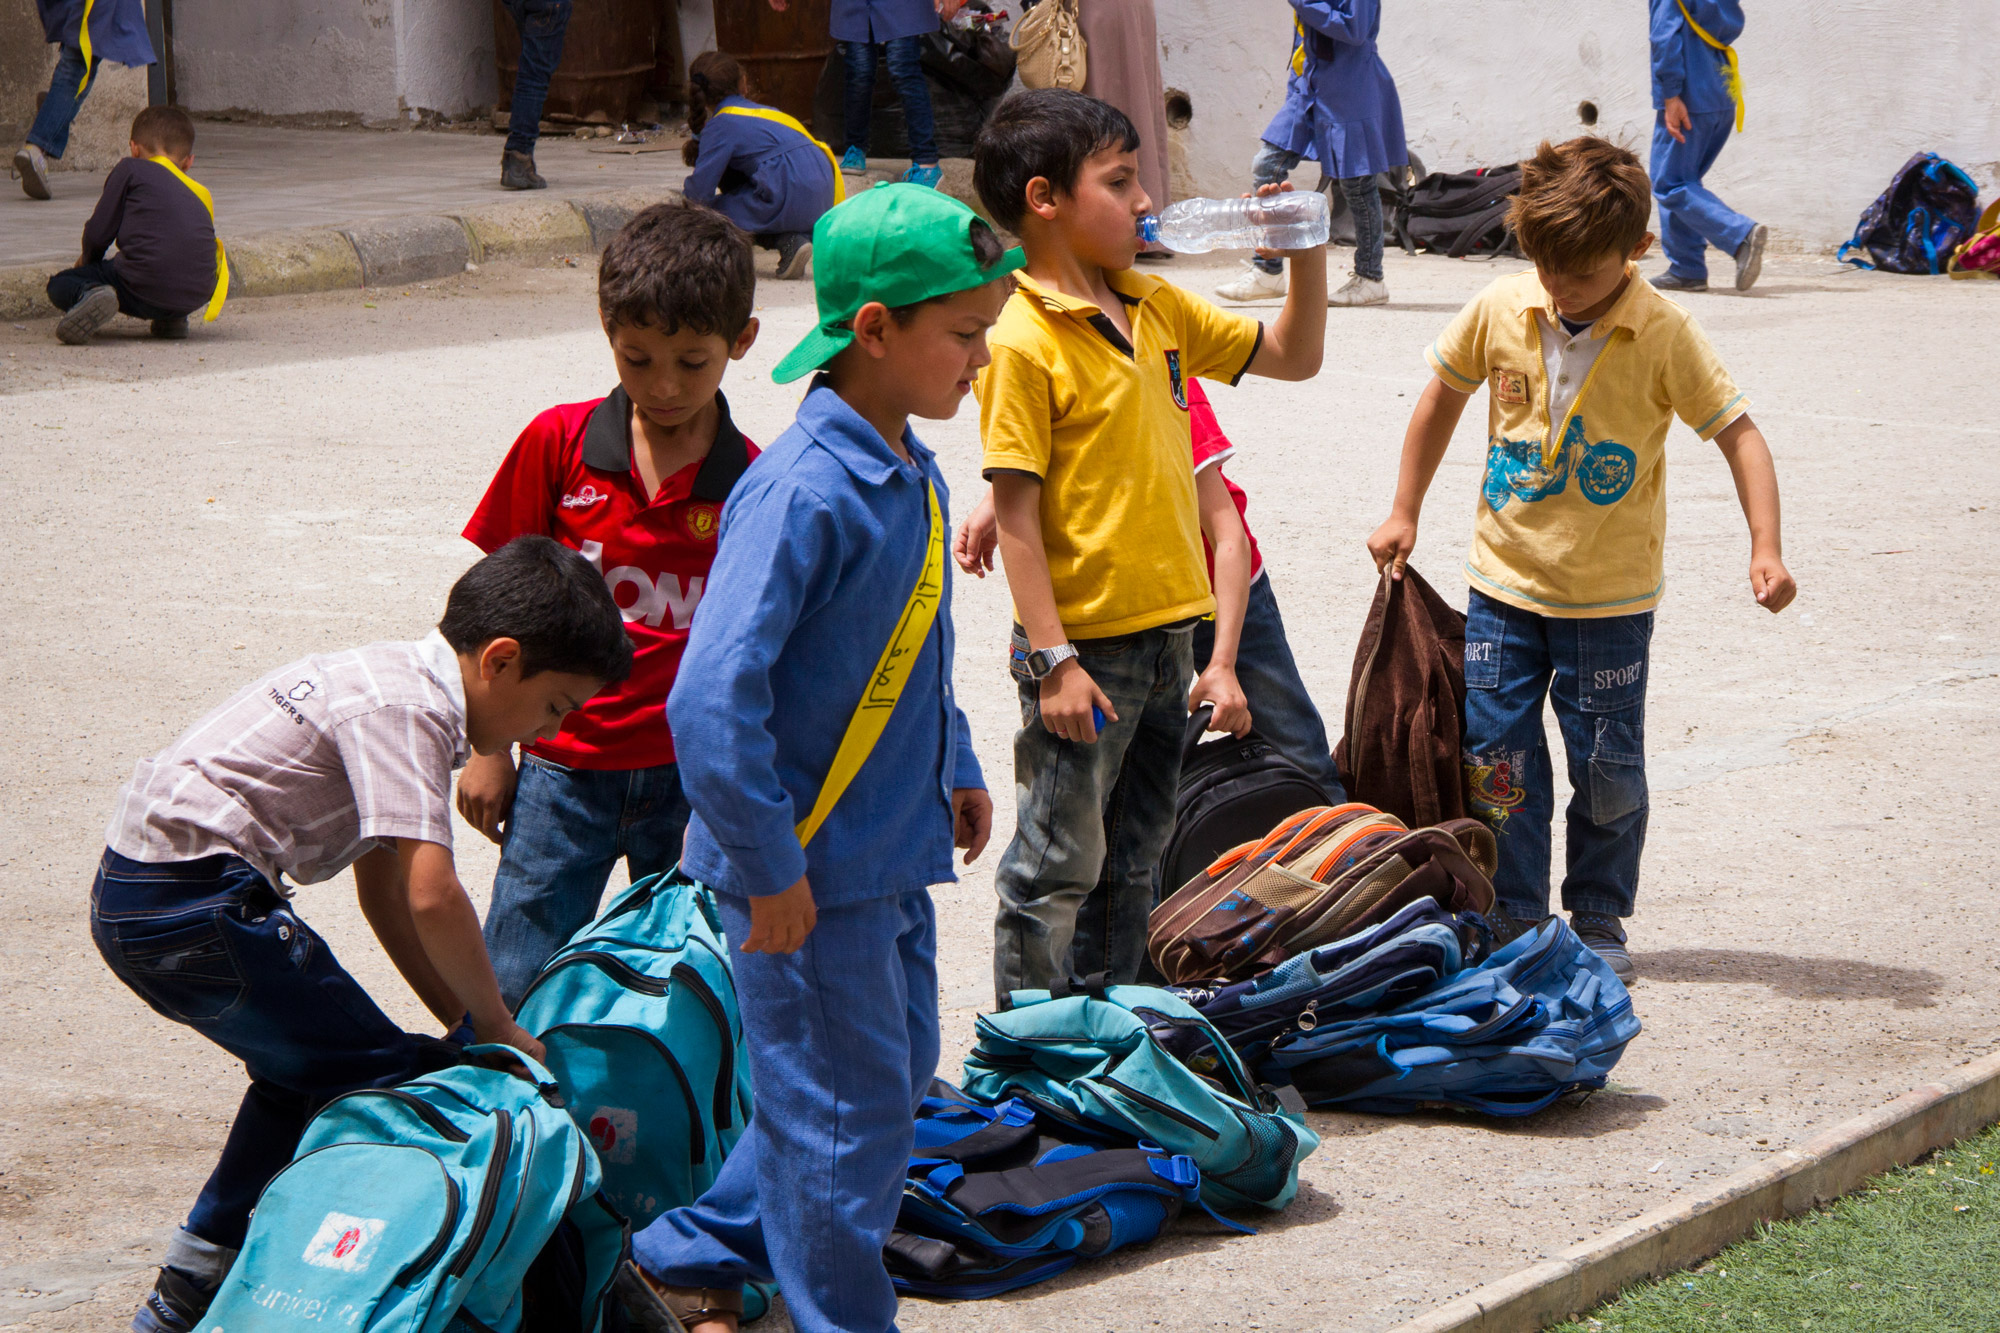 Many Syrian refugees have school bags provided by NGOs such as UNICEF.